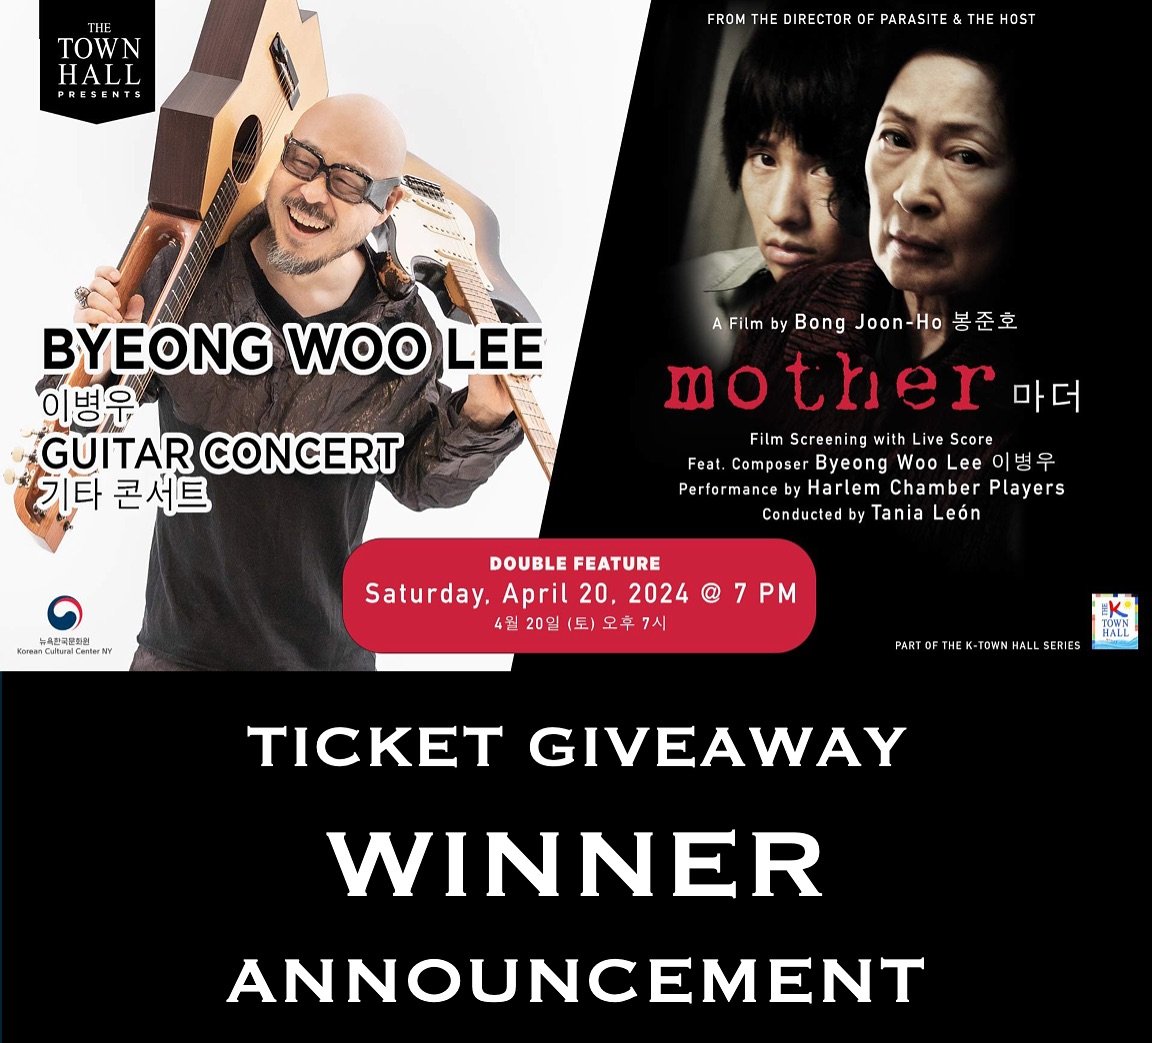 [🎉Winner Announcements🎫]
Thank you to everyone who participated in the Ticket Giveaway Event for a Byeong Woo Lee Guitar Concert + Bong Joon Ho&rsquo;s 'Mother' Live Score event!! (Tickets for the show on April 20th)🎸🎬

❤️Congratulations to our 5